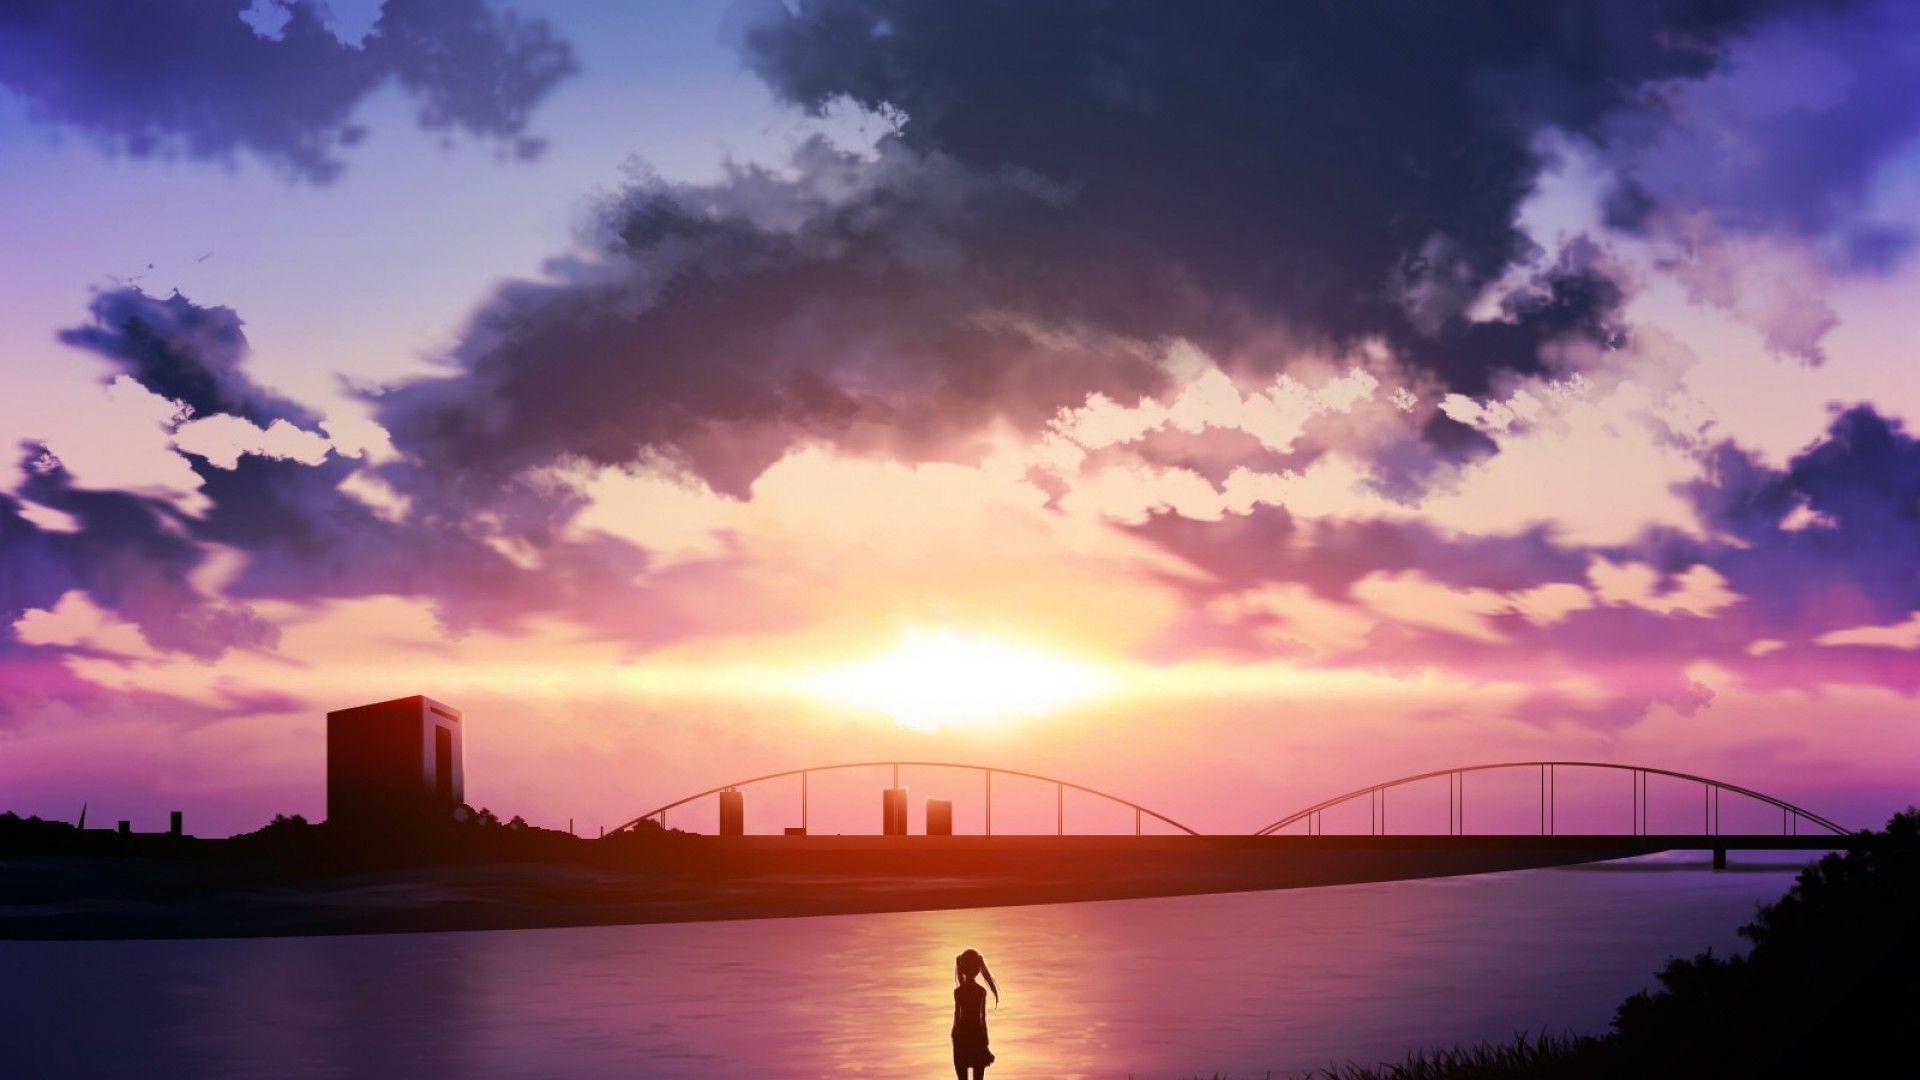 Sunset Anime Scenery Wallpaper. Brothers Conflict